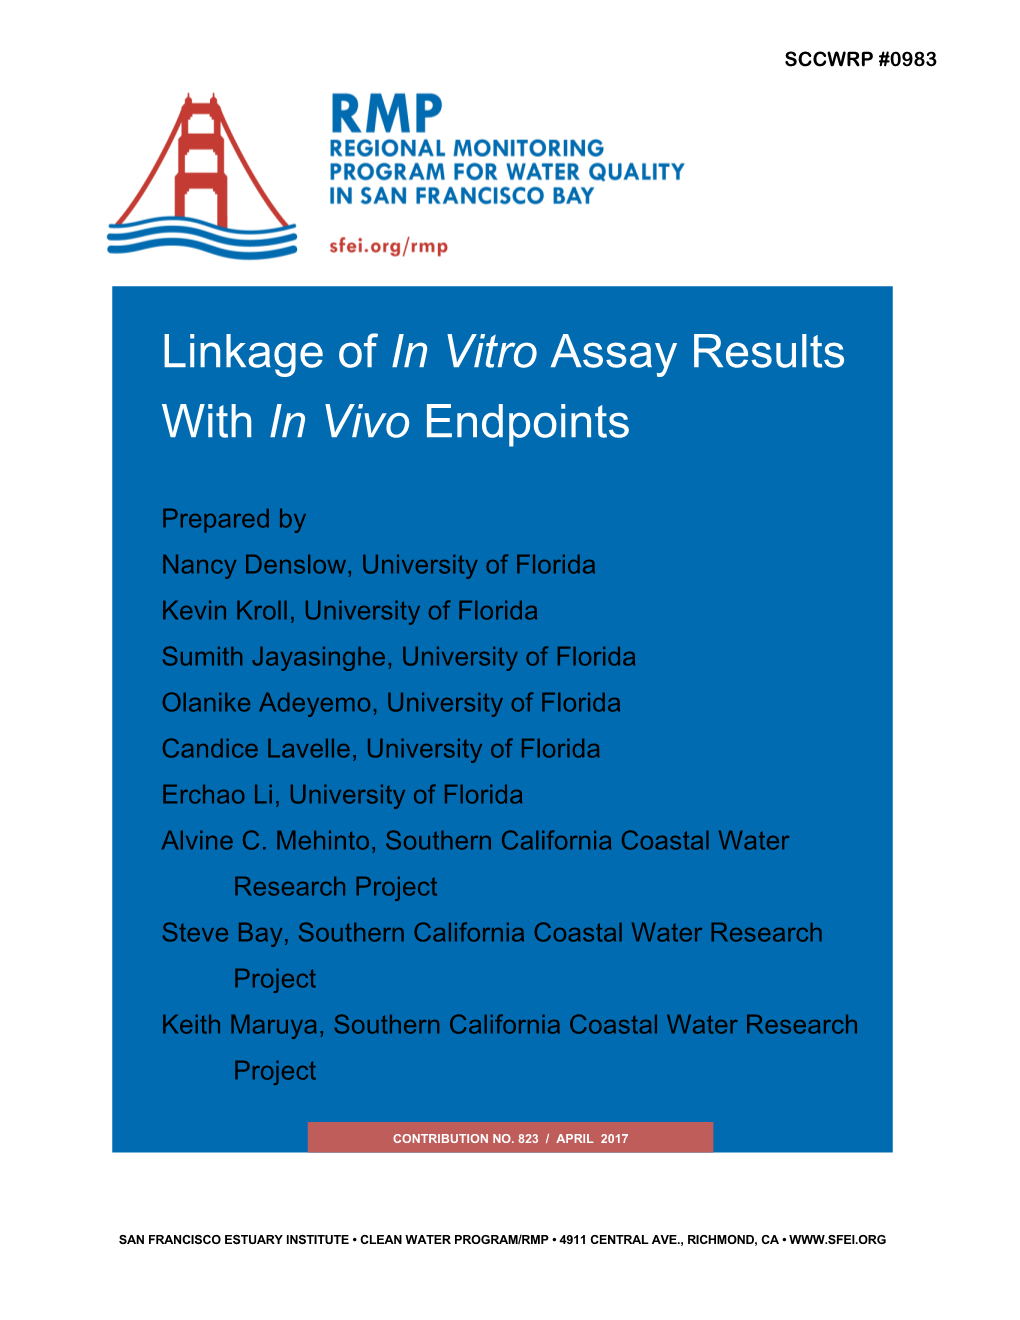 Linkage of in Vitro Assay Results with in Vivo Endpoints